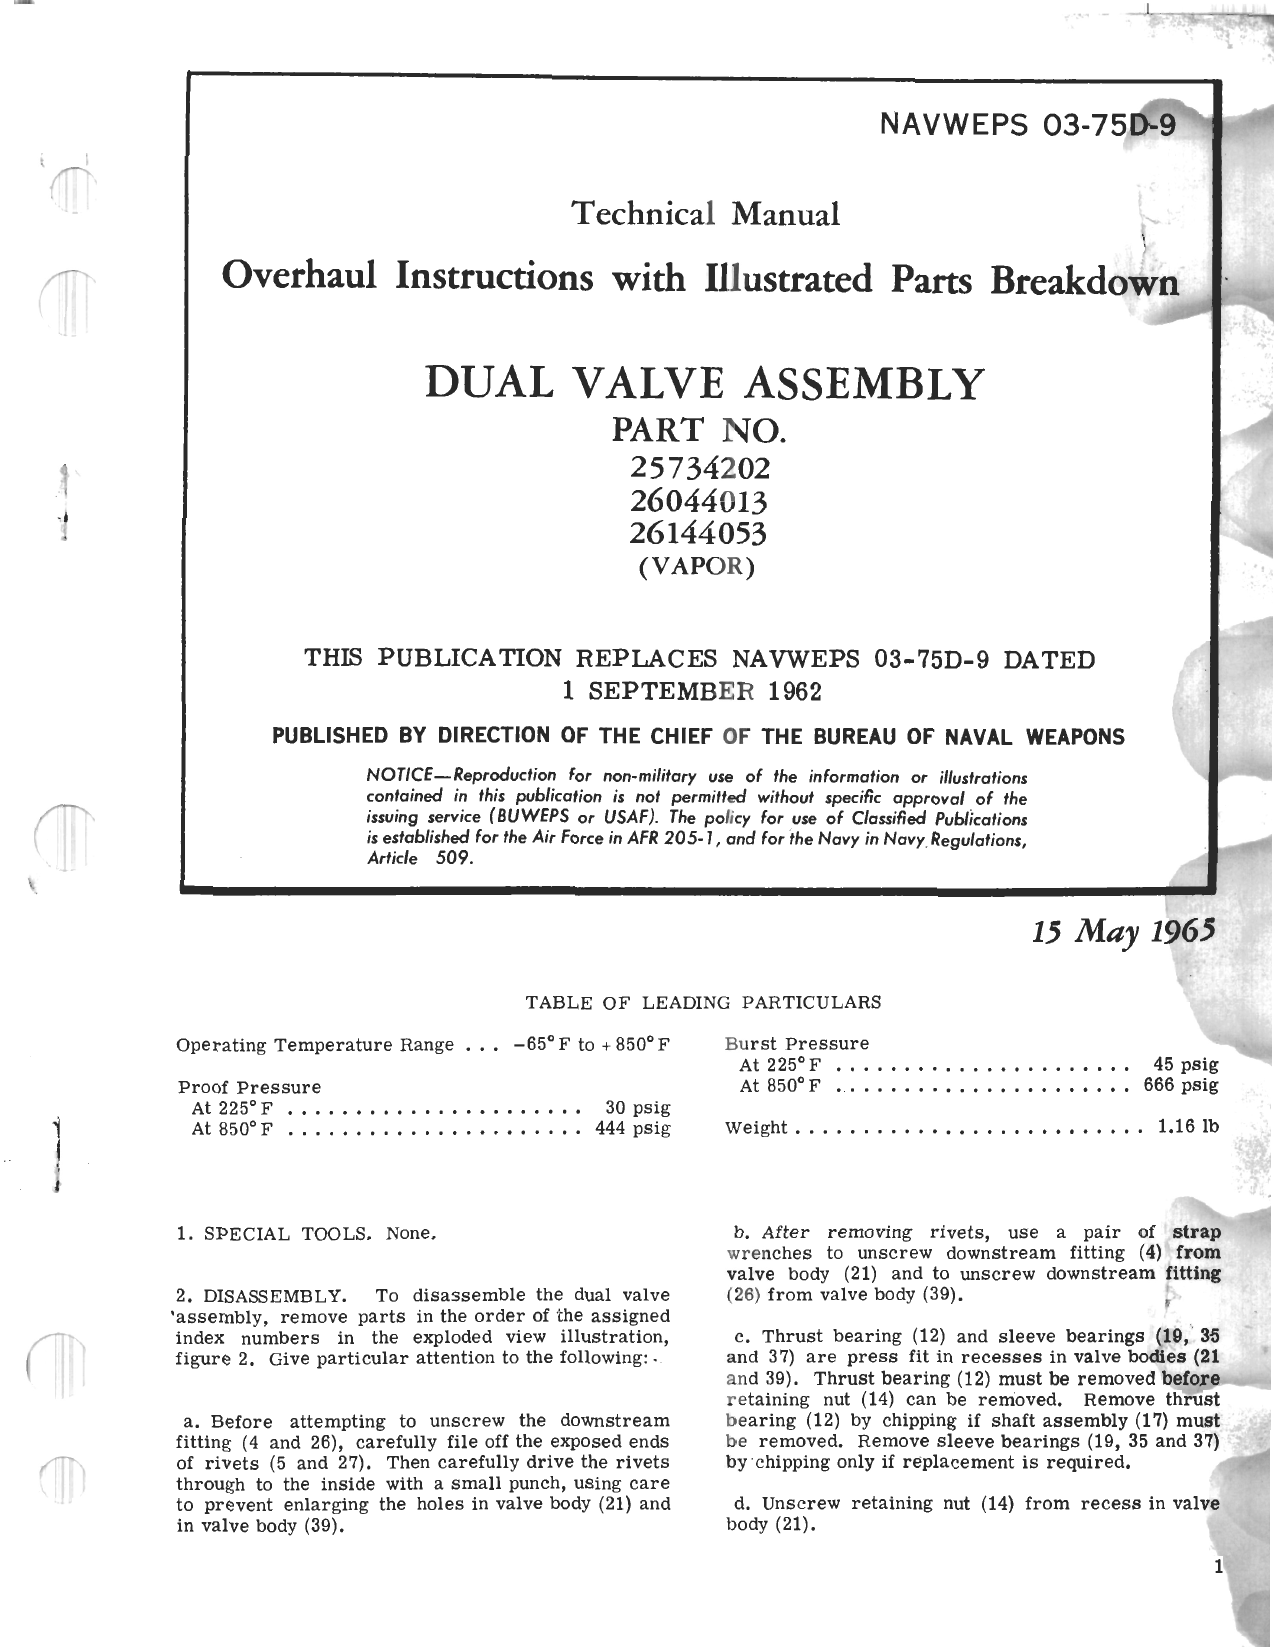 Sample page 1 from AirCorps Library document: Overhaul Instructions with Illustrated Parts Breakdown for Dual Valve Assy - Parts 25734202, 26044013, and 26144053